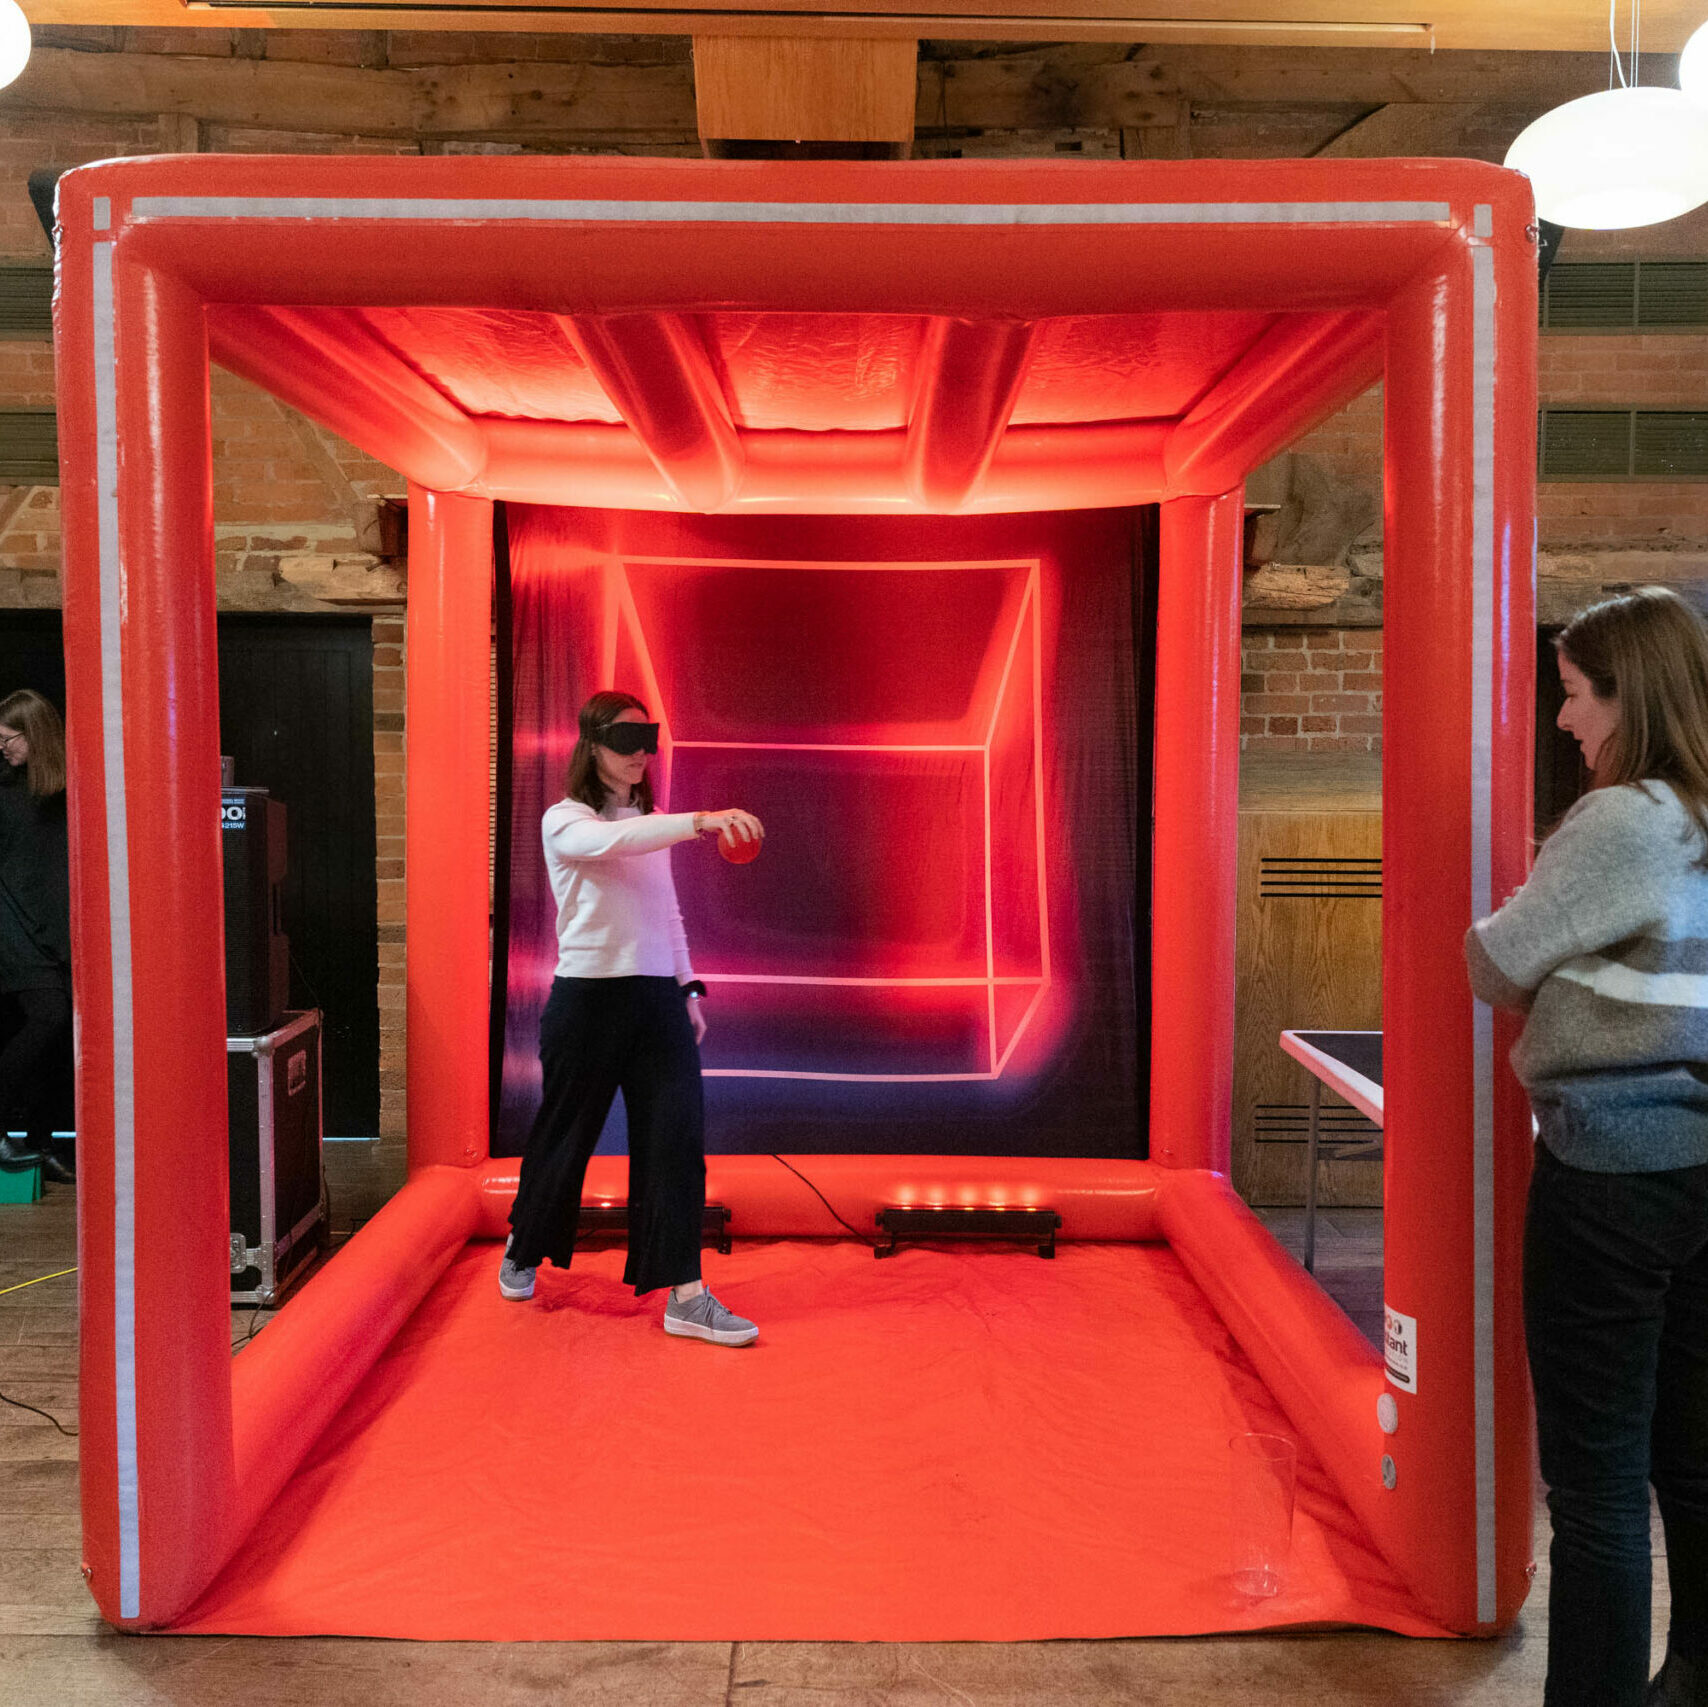 A women playing the ball drop game inside a giant red inflatable cube.